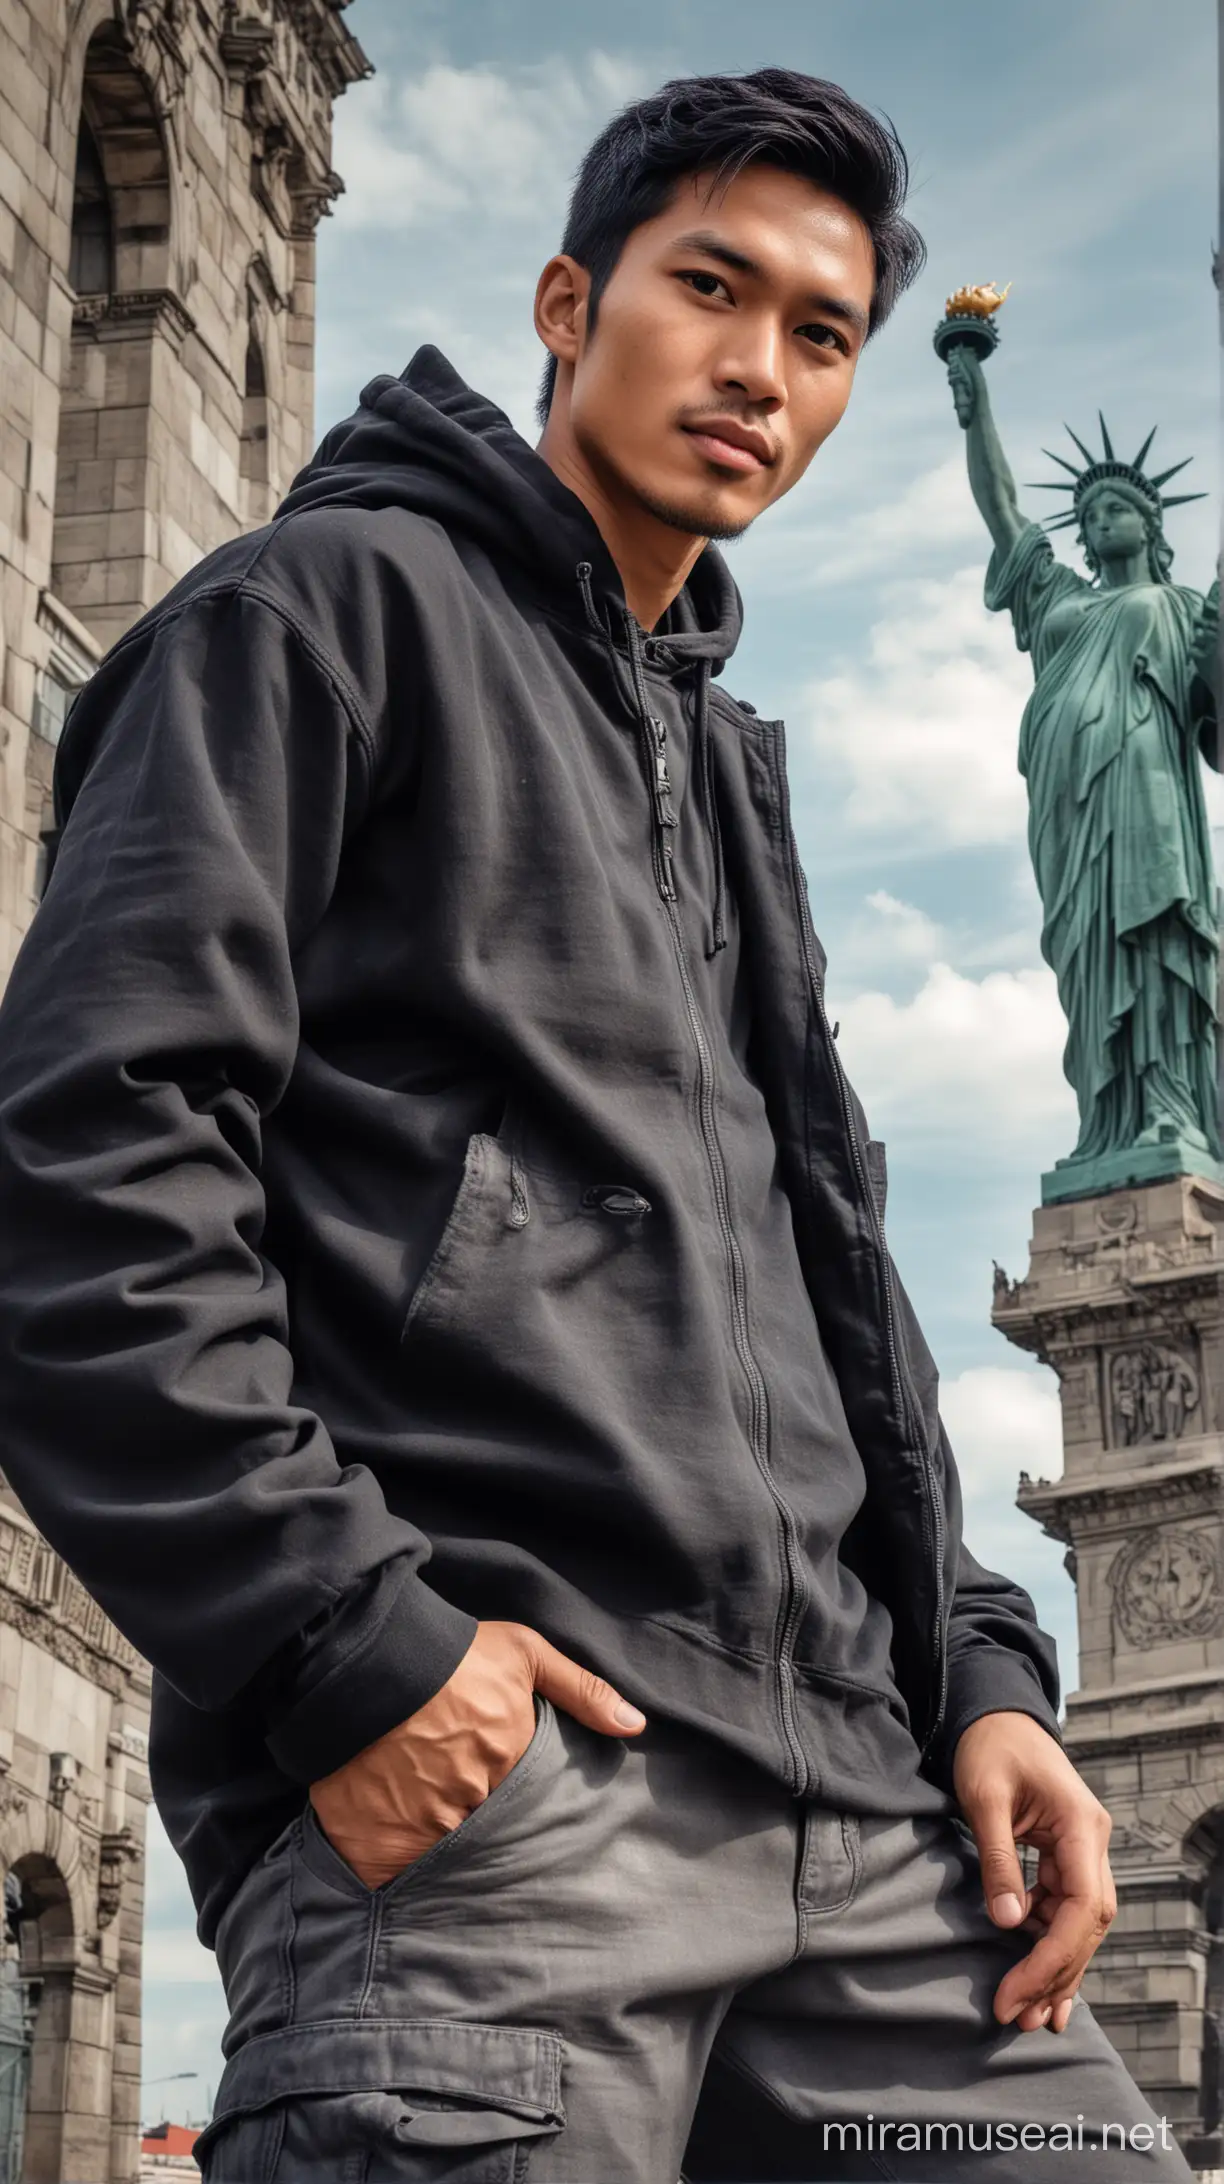 Stylish Indonesian Man in Black Hoodie Jacket at Liberty Statue Background